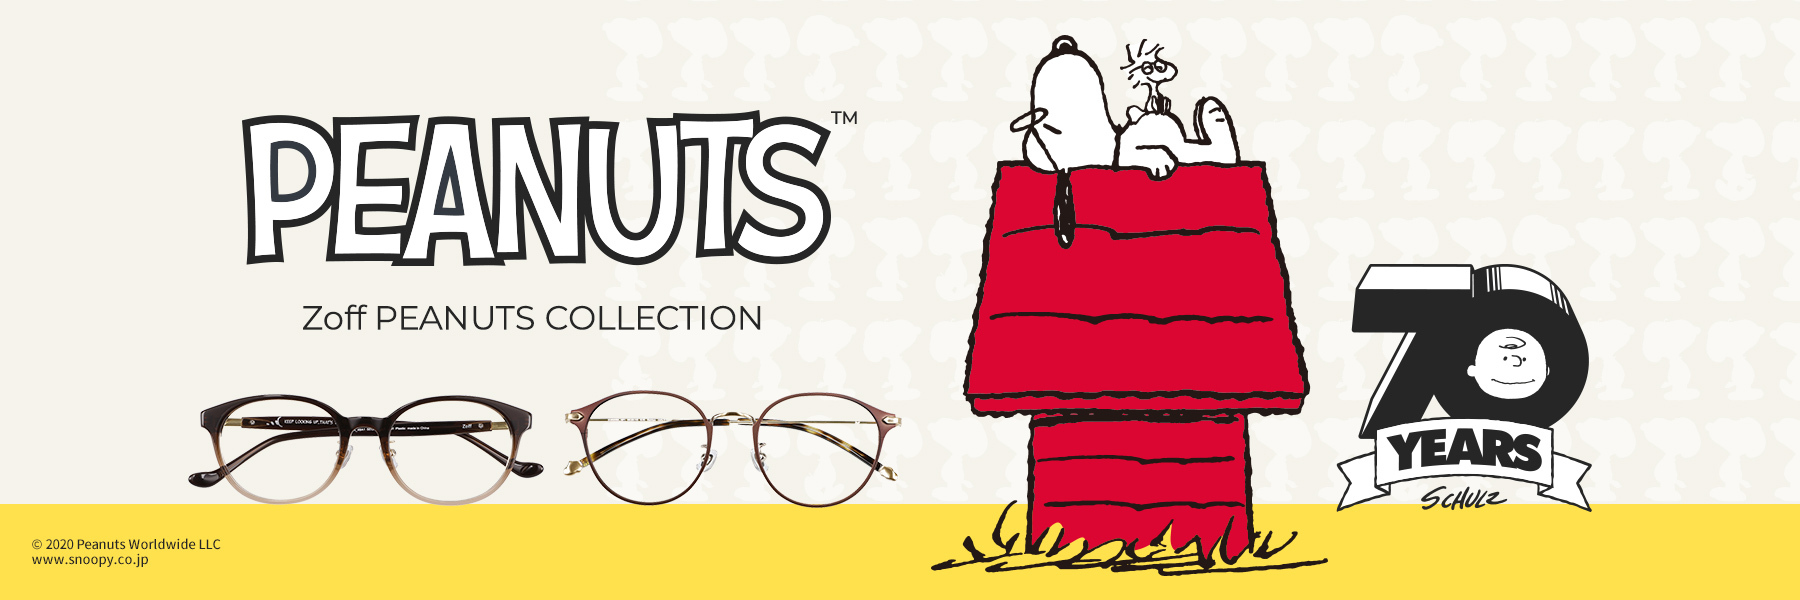 Zoff PEANUTS COLLECTION」全26種の先行予約受付開始。スヌーピーや